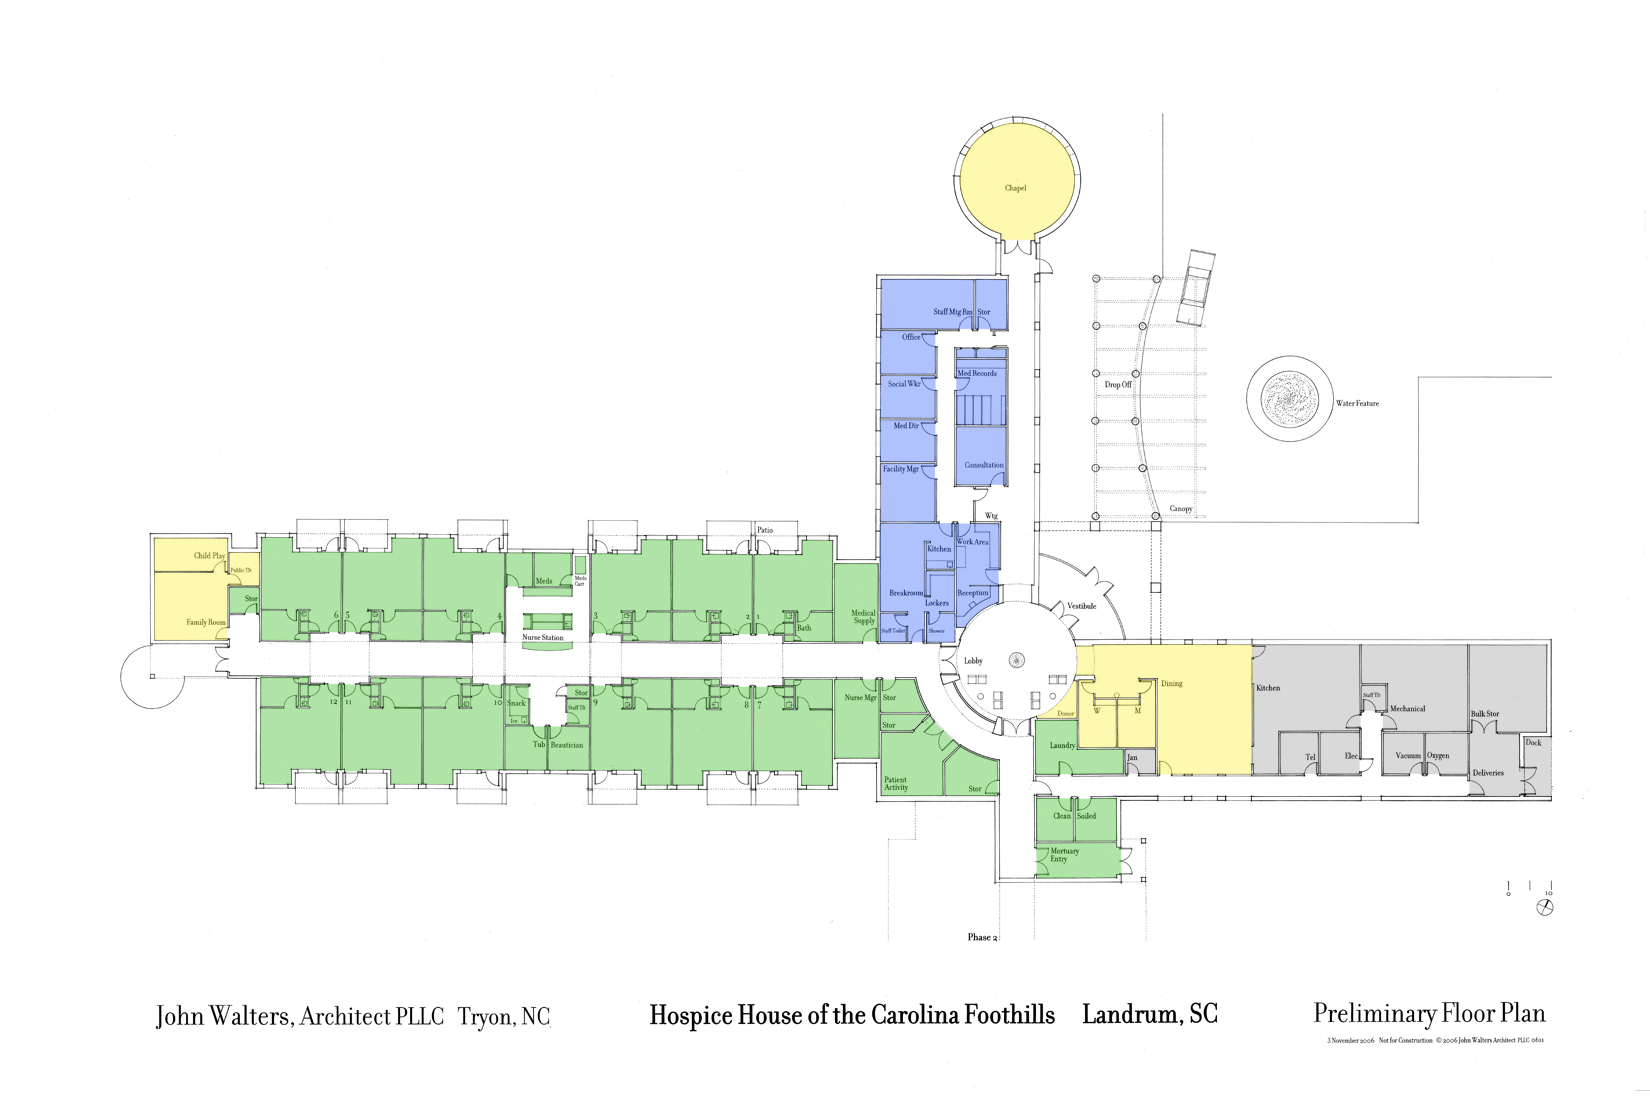 A floor plan of the Smith Phayer Hospice House showing the organization of the facility. Twelve resident rooms are in the southwest wing, administrative offices and a chapel in the northwest wing, and a dining room, kitchen, and various mechanical rooms in the northeast wing.